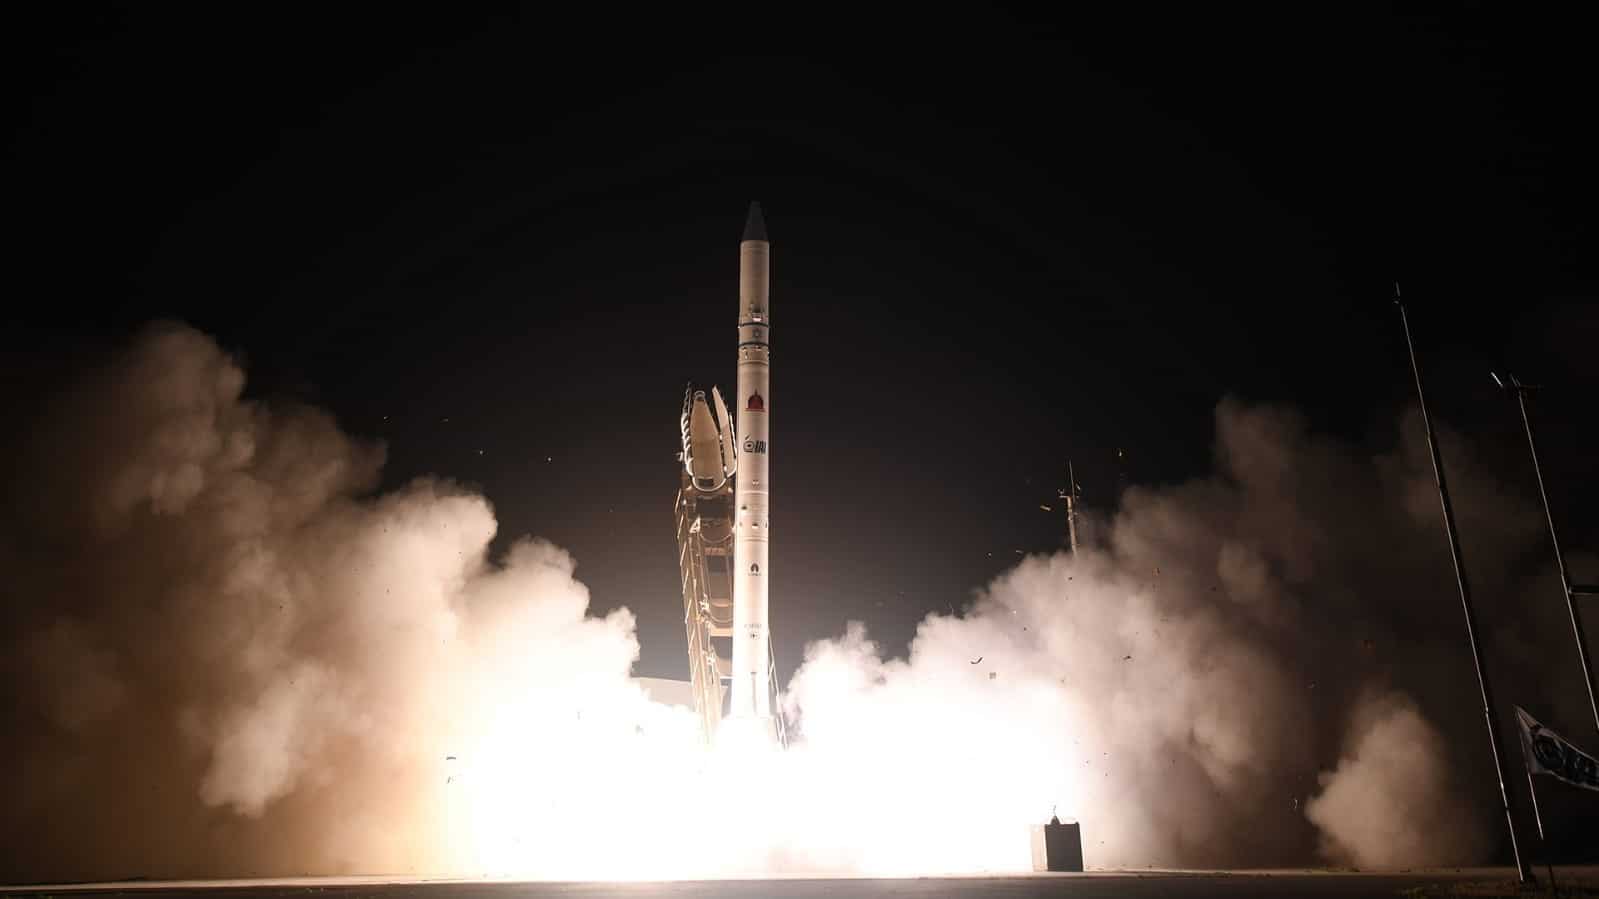 The Israel Ministry of Defense and Israel Aerospace Industries Have Successfully Launched the Ofek 16 Satellite – Which Has Begun its Orbit in Space